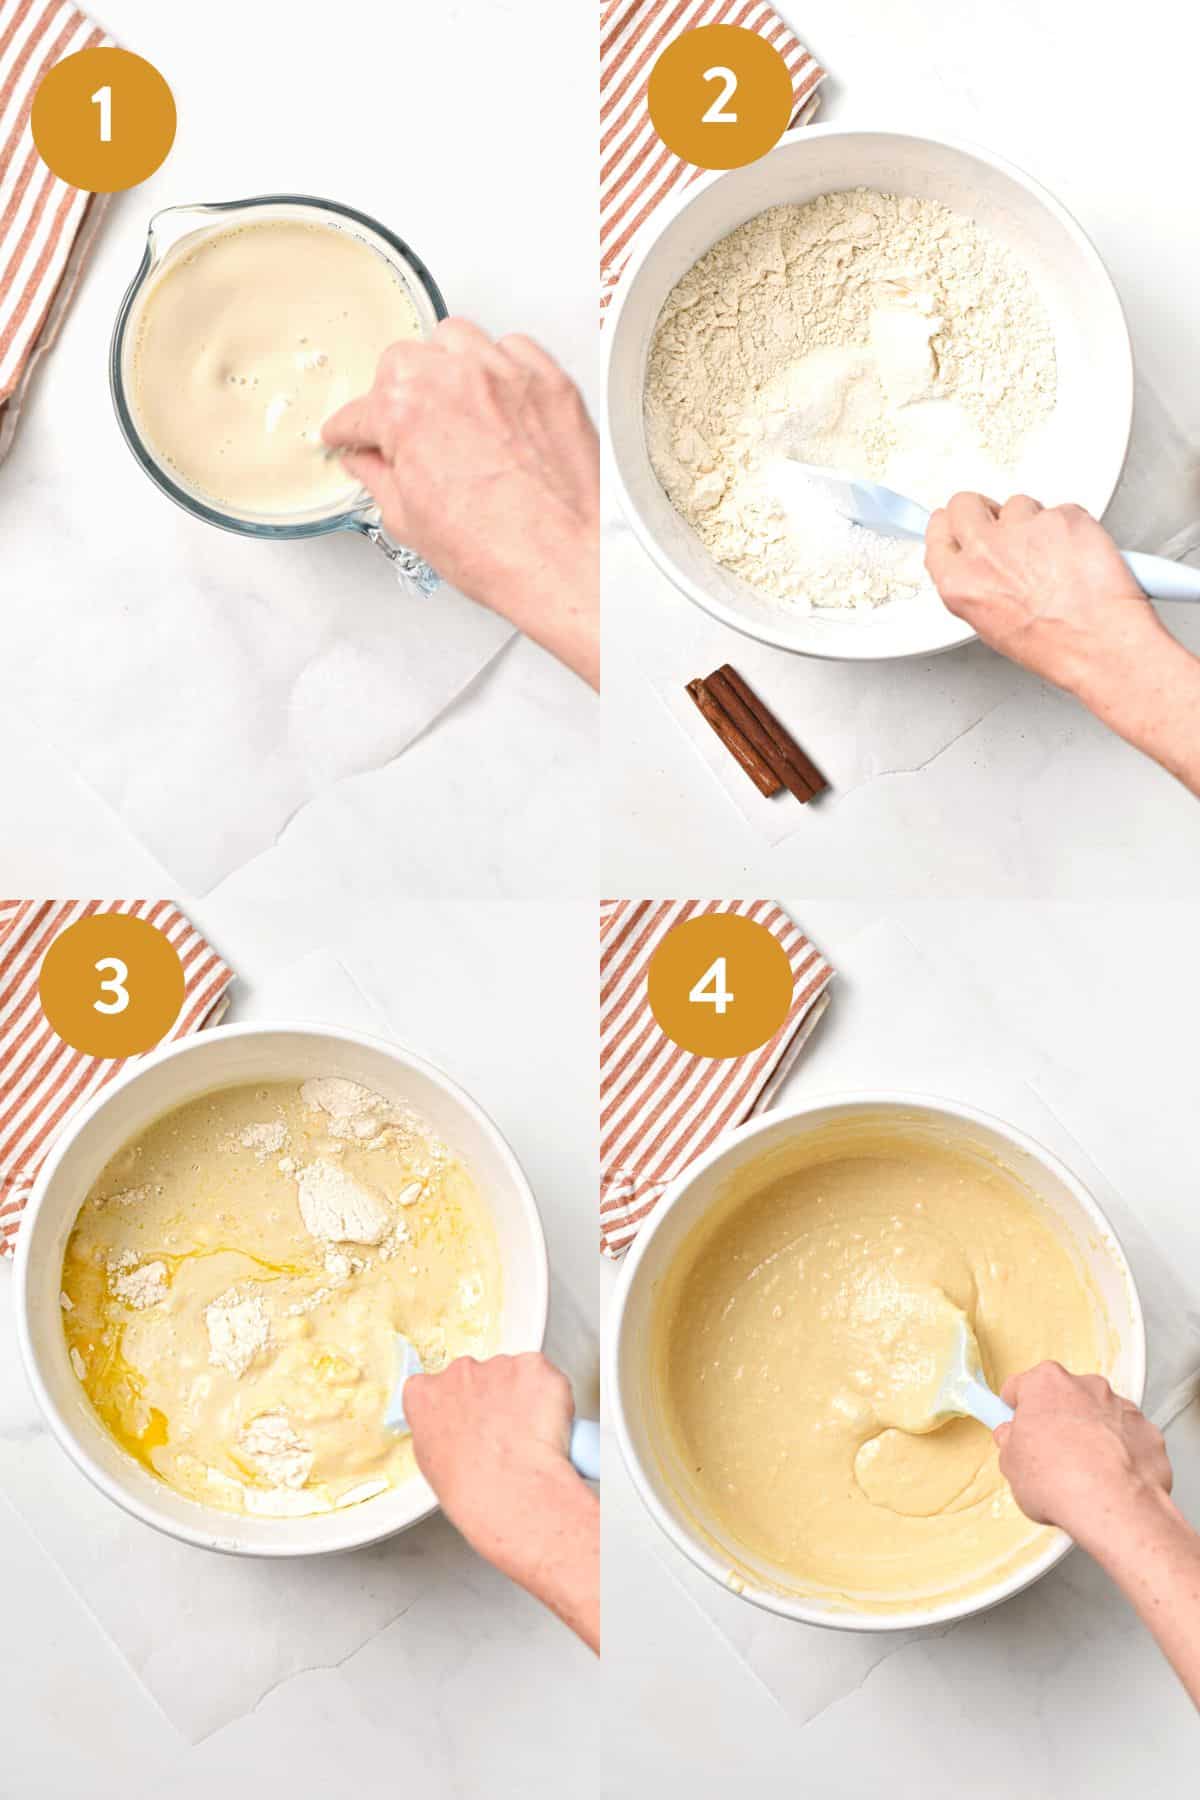 Step-by-step instructions to Making Vegan Coffee Cake Batter